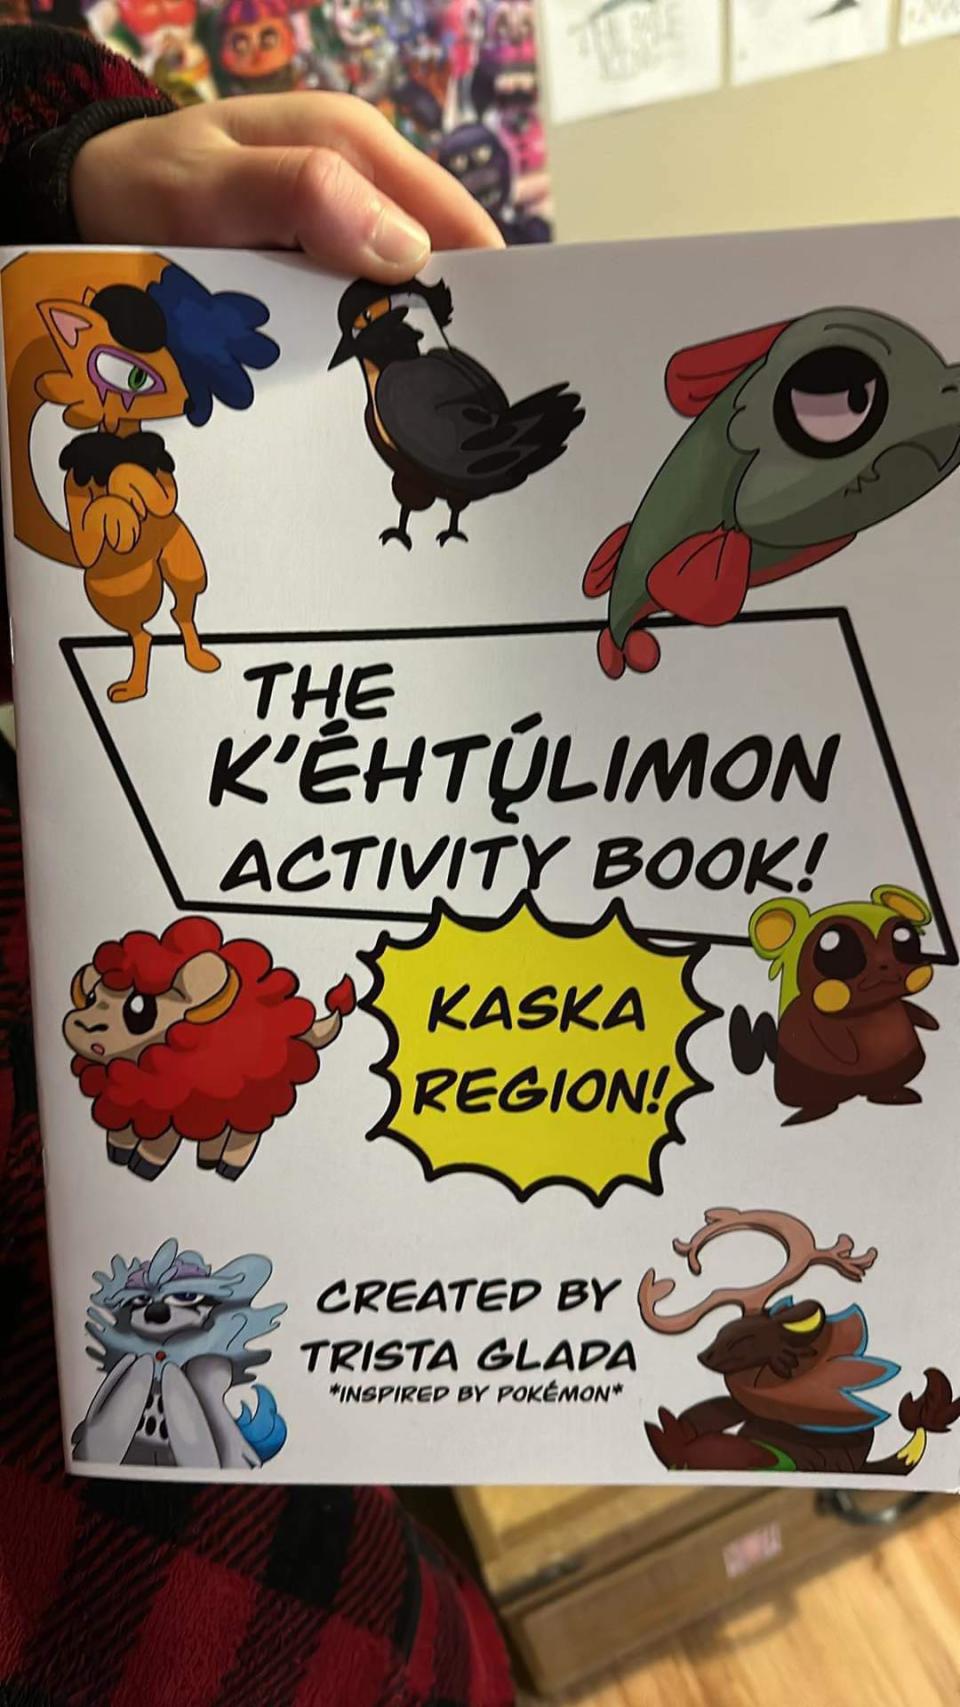 The cover of Trista Glada's activity book. The book will soon be available at Titan's Gaming and Collectibles in Whitehorse, Yukon.